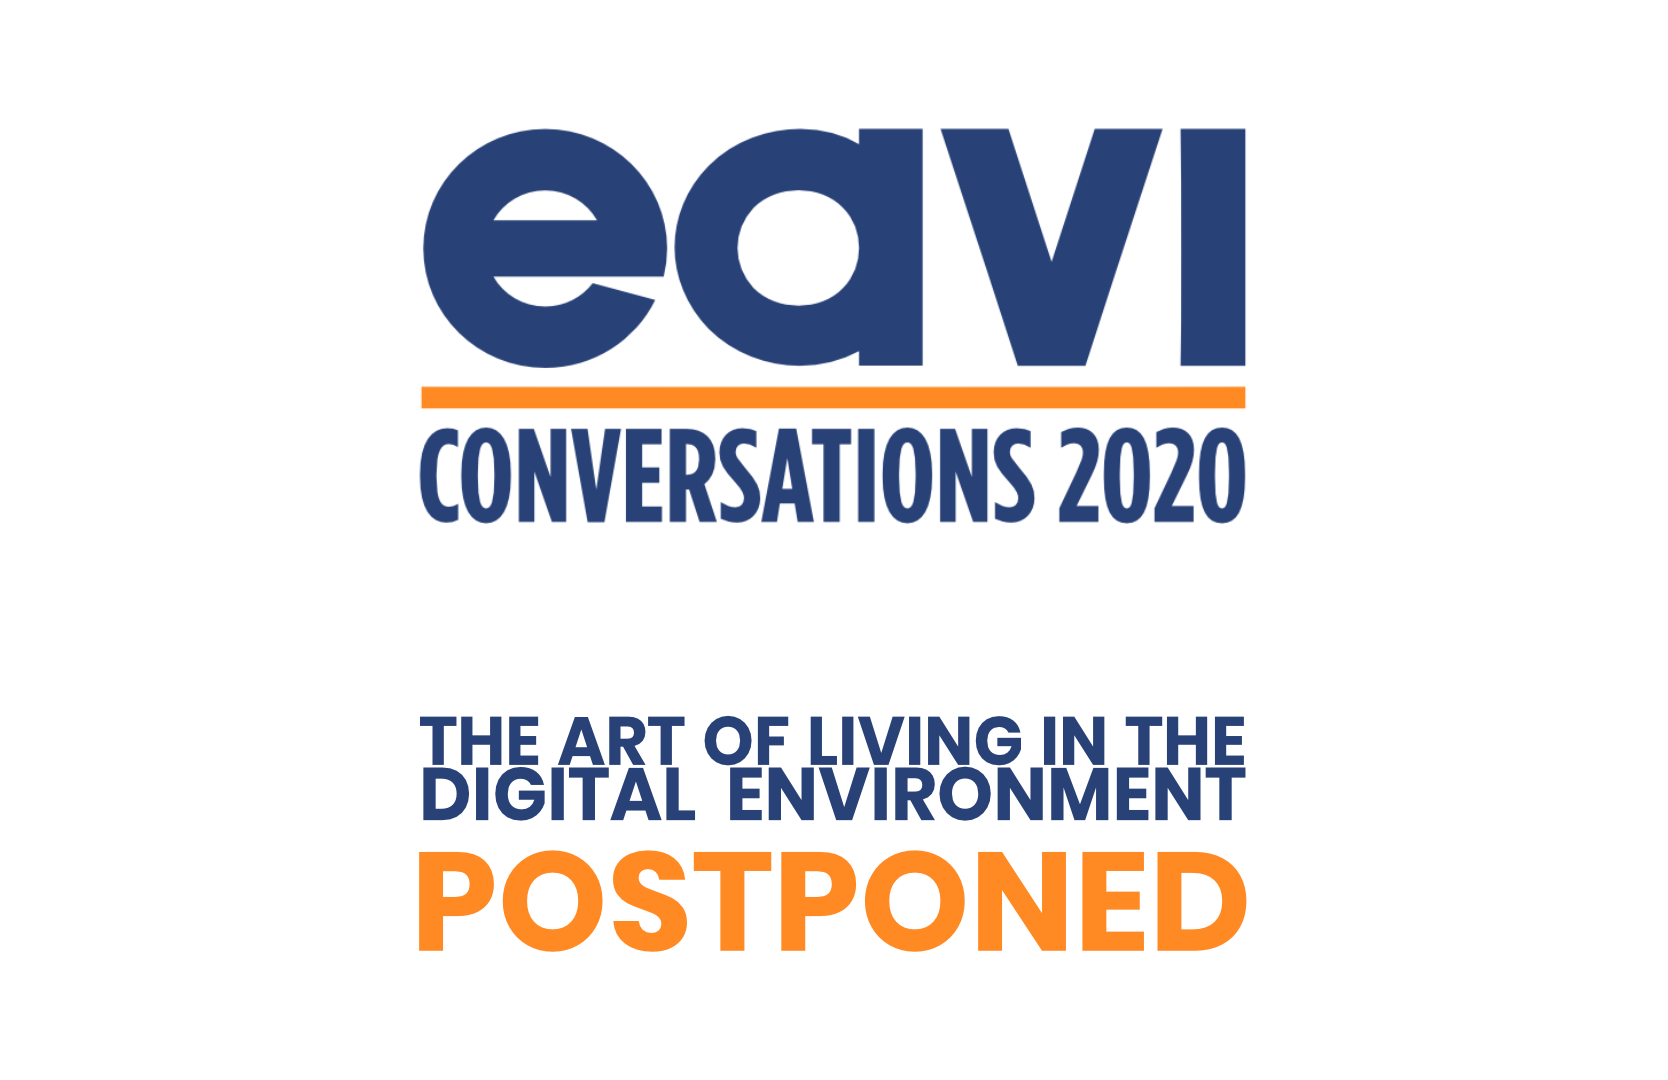 EAVI Conversations 2020 – The Conference is postponed